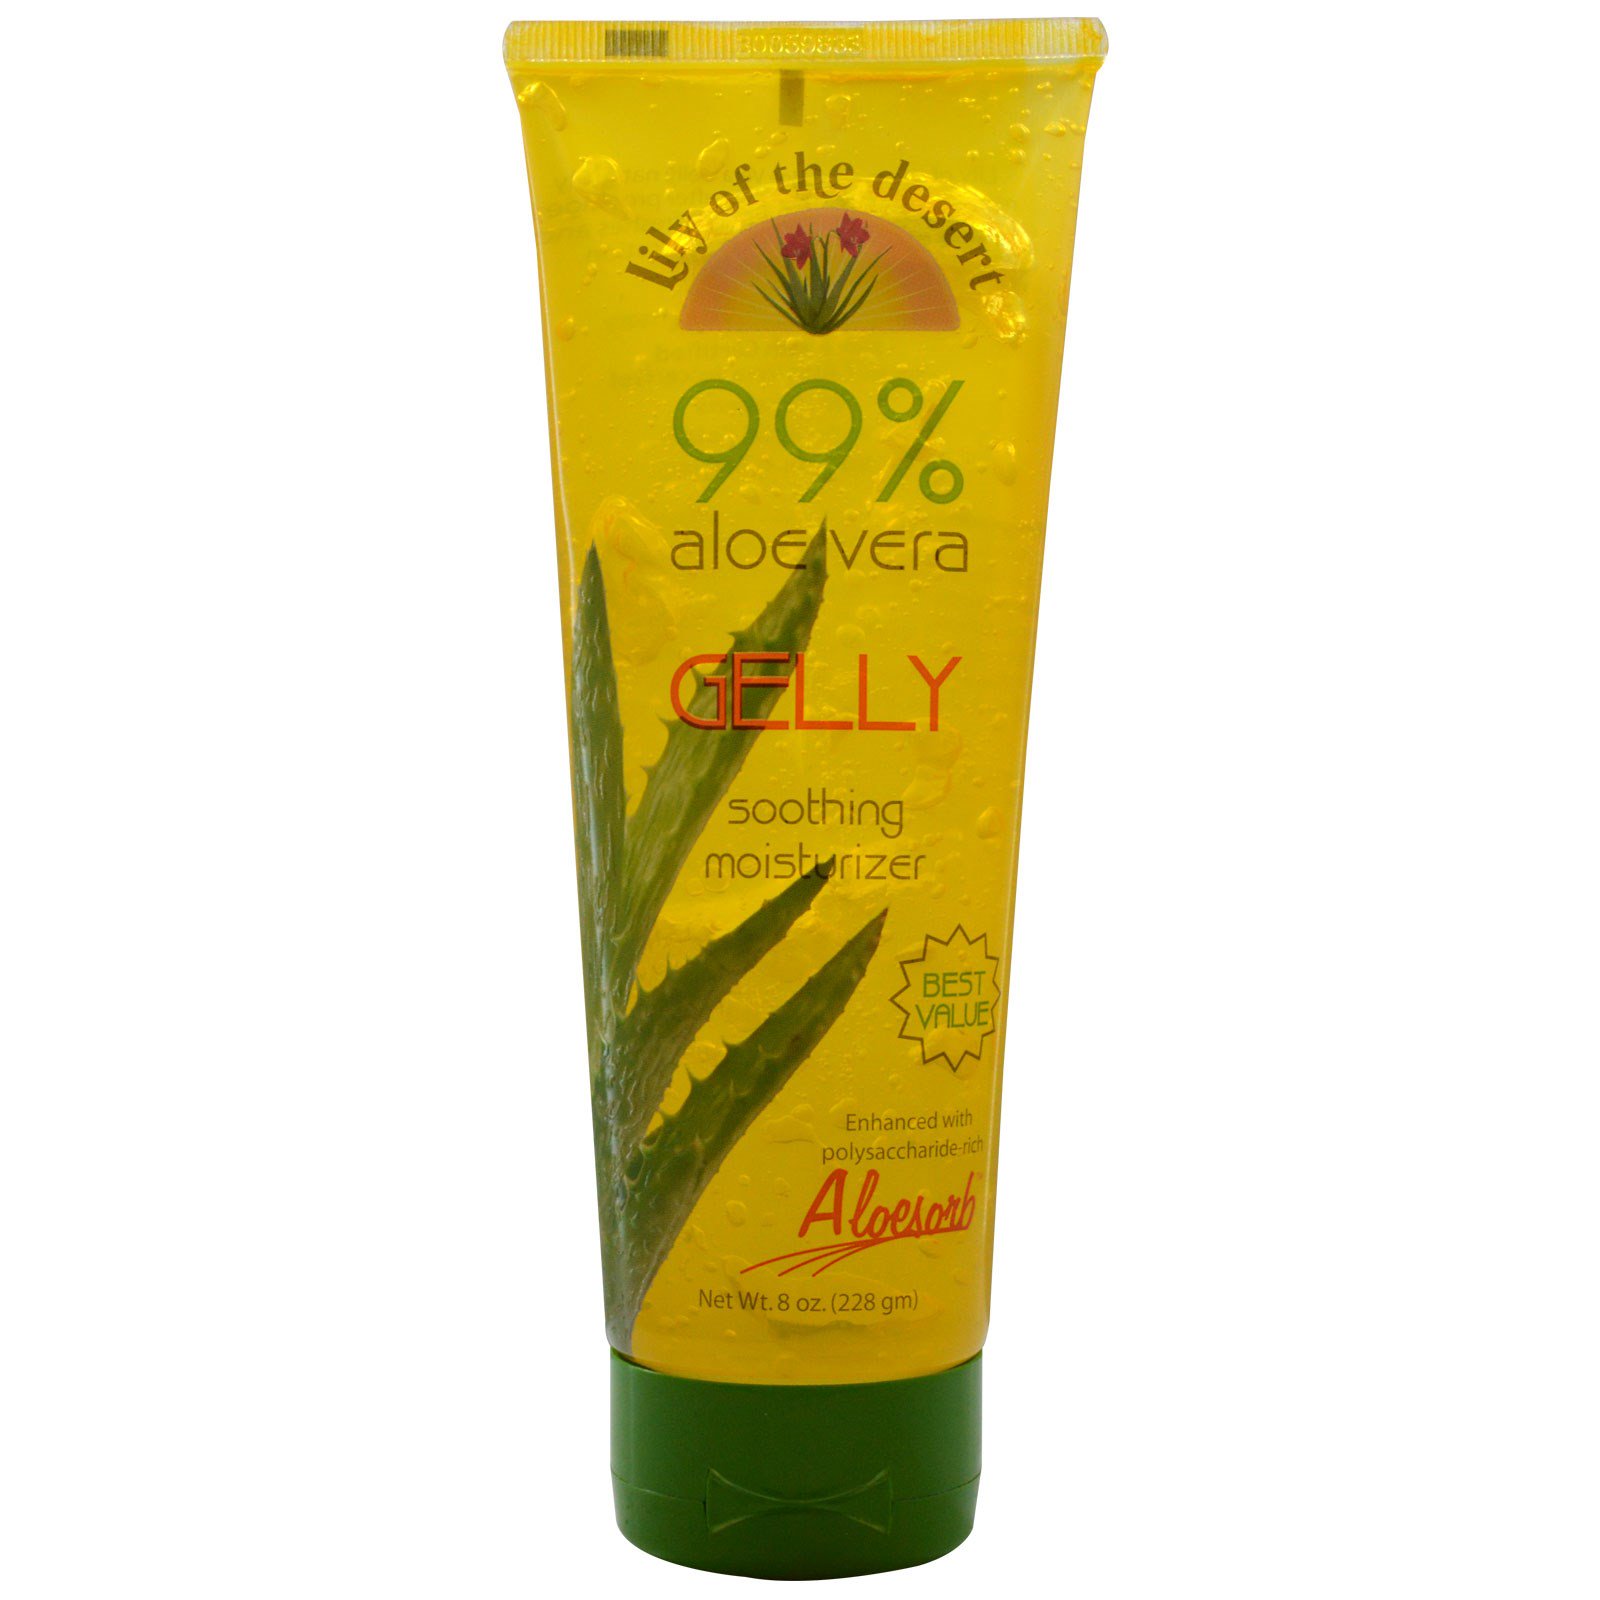 LILY OF THE DESERT - 99% ALOE VERA GELLY - SOOTHING MOISTURIZER - 4oz